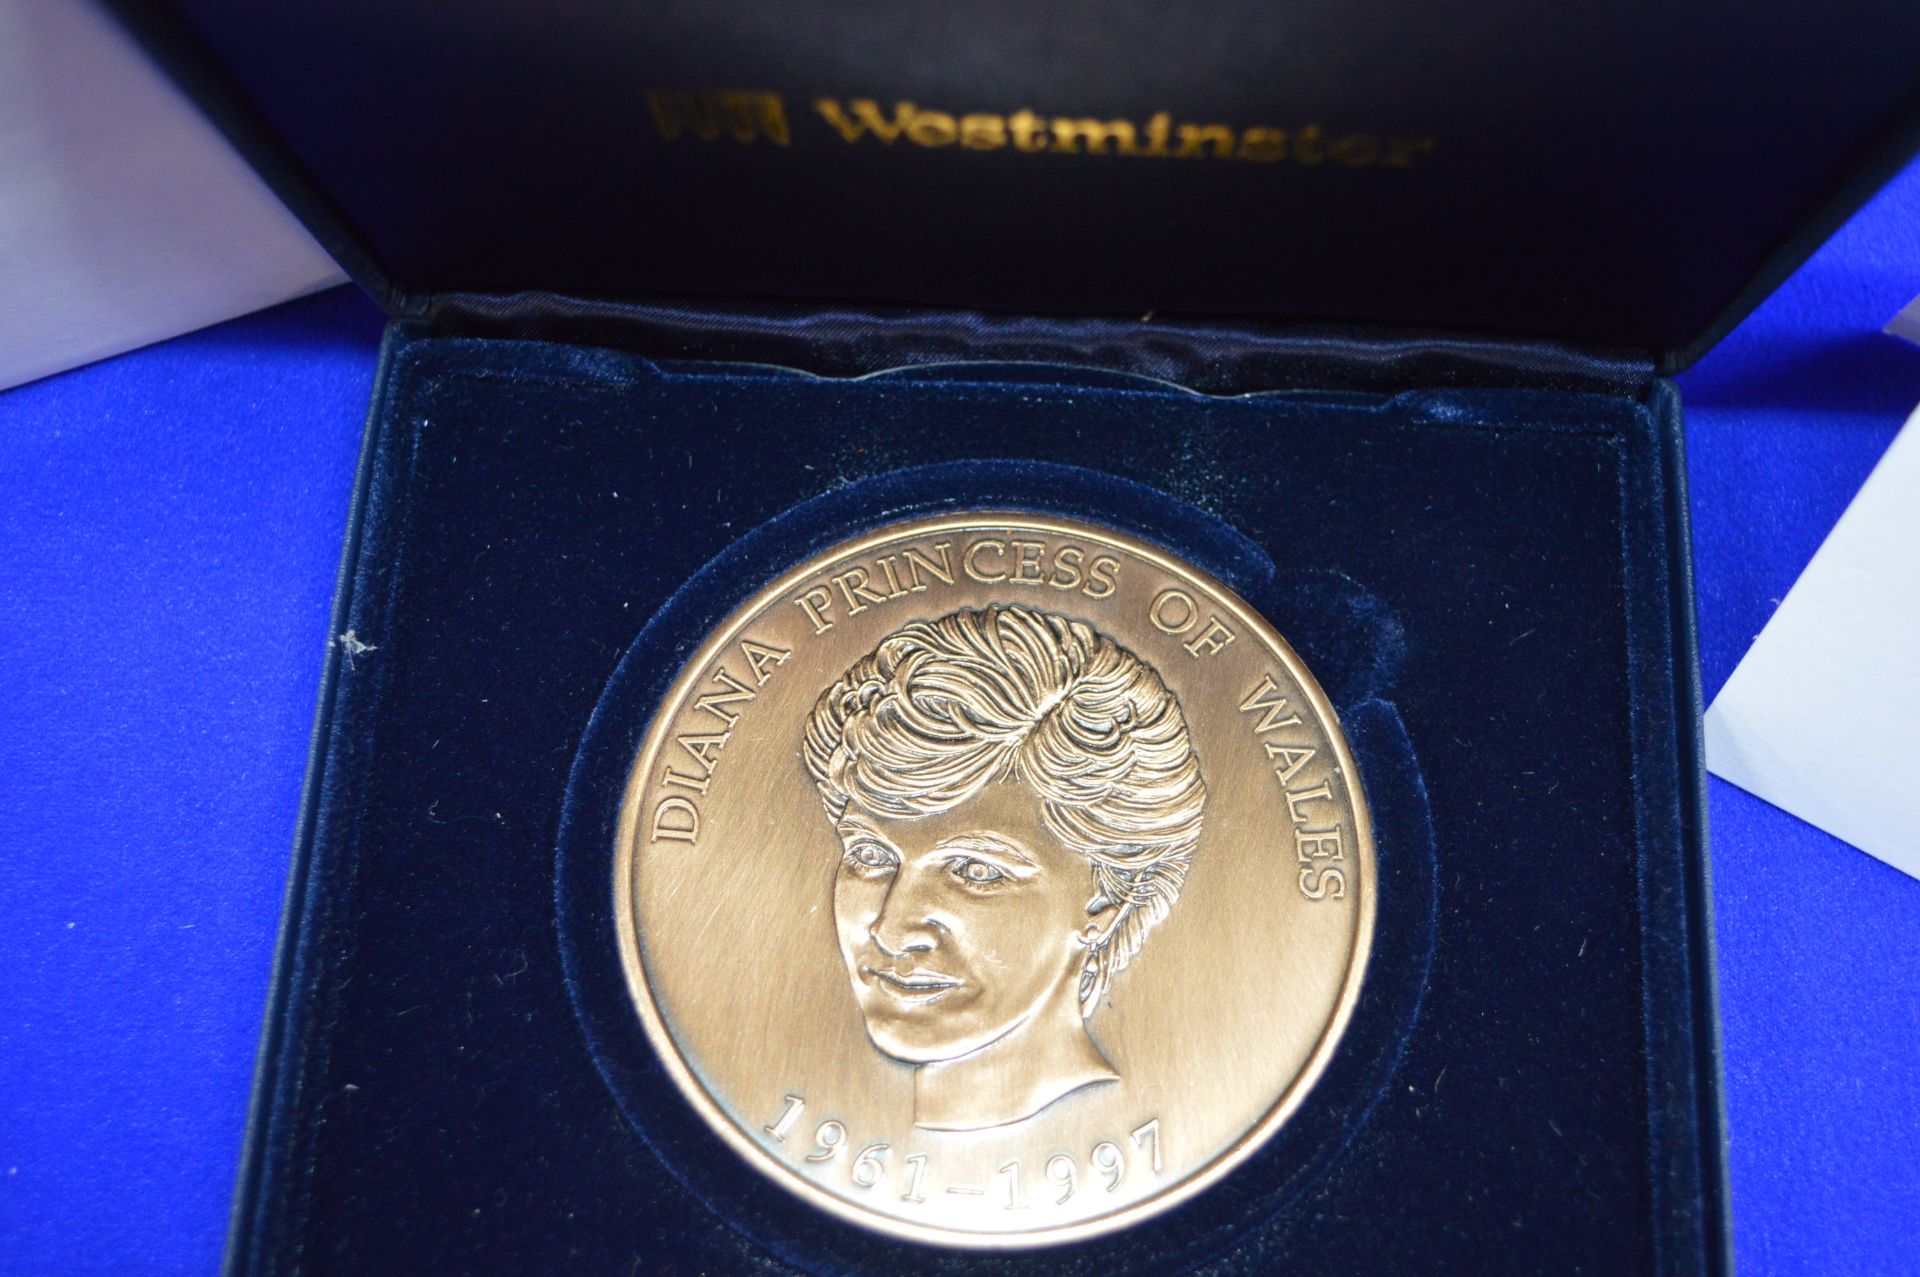 Diana Princess of Wales Commemorative Coin - Image 2 of 2